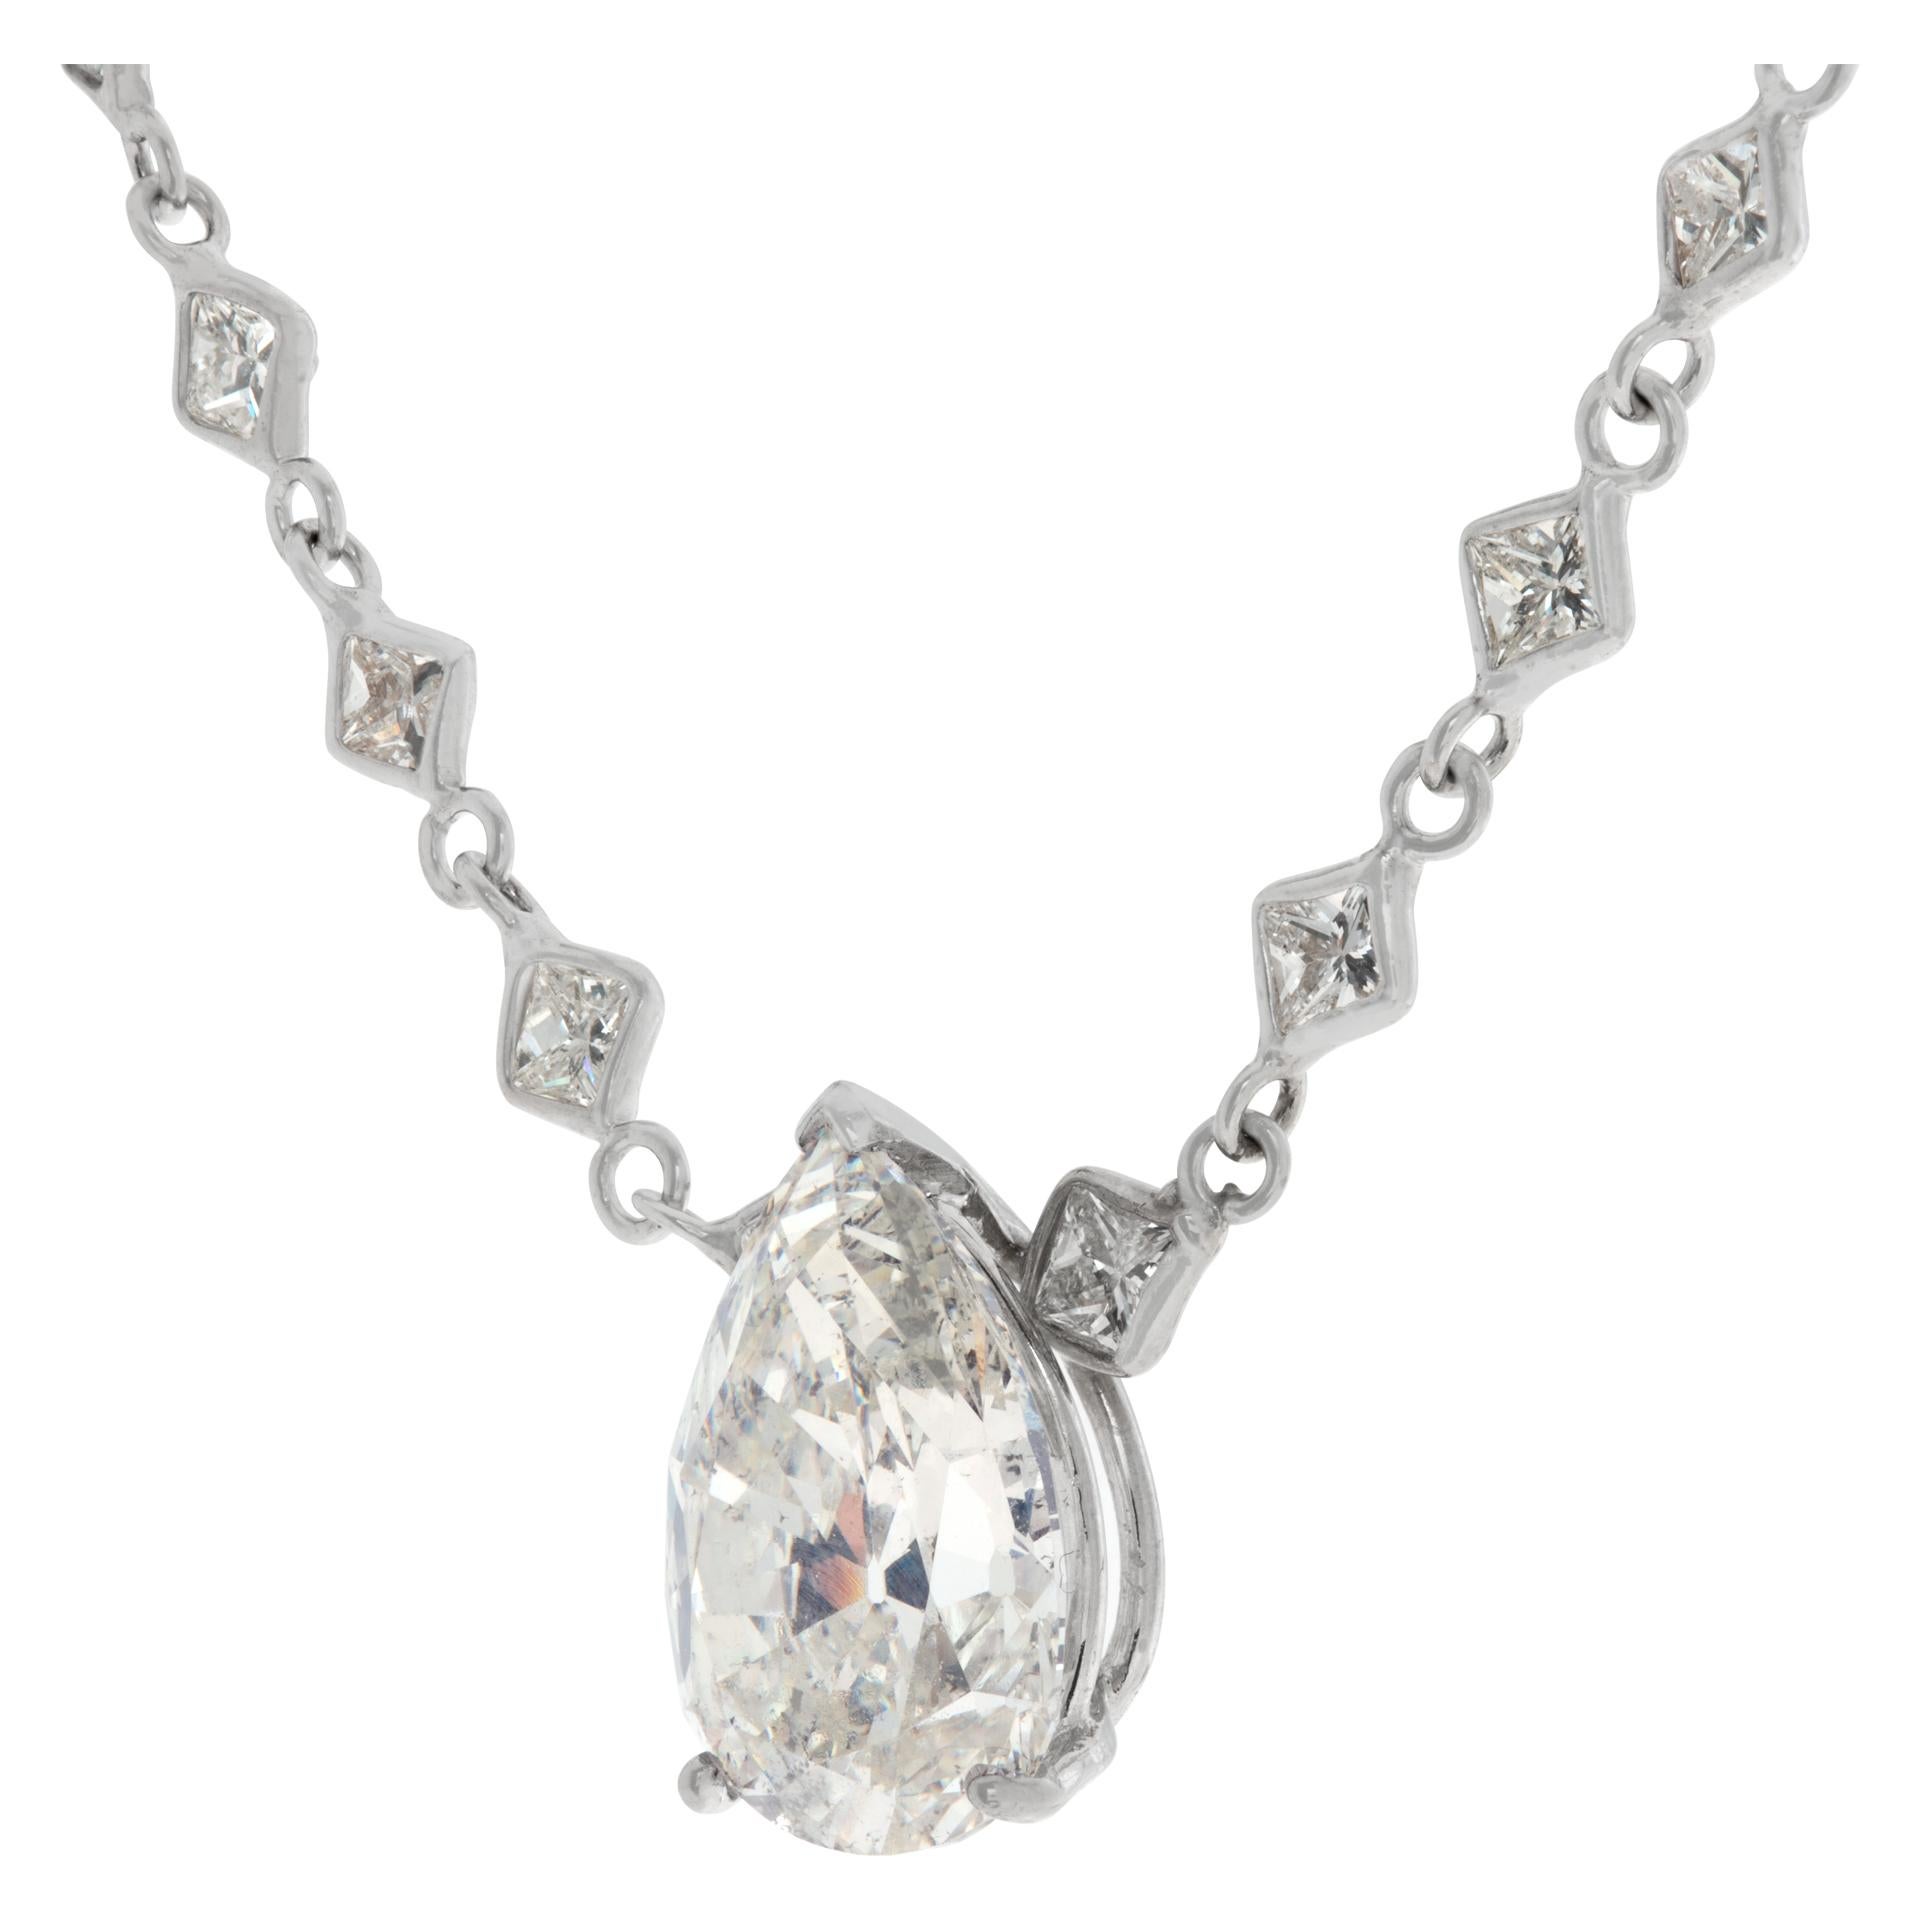 Diamond pendant necklace with GIA certified pear shaped princess cut diamonds In Excellent Condition For Sale In Surfside, FL